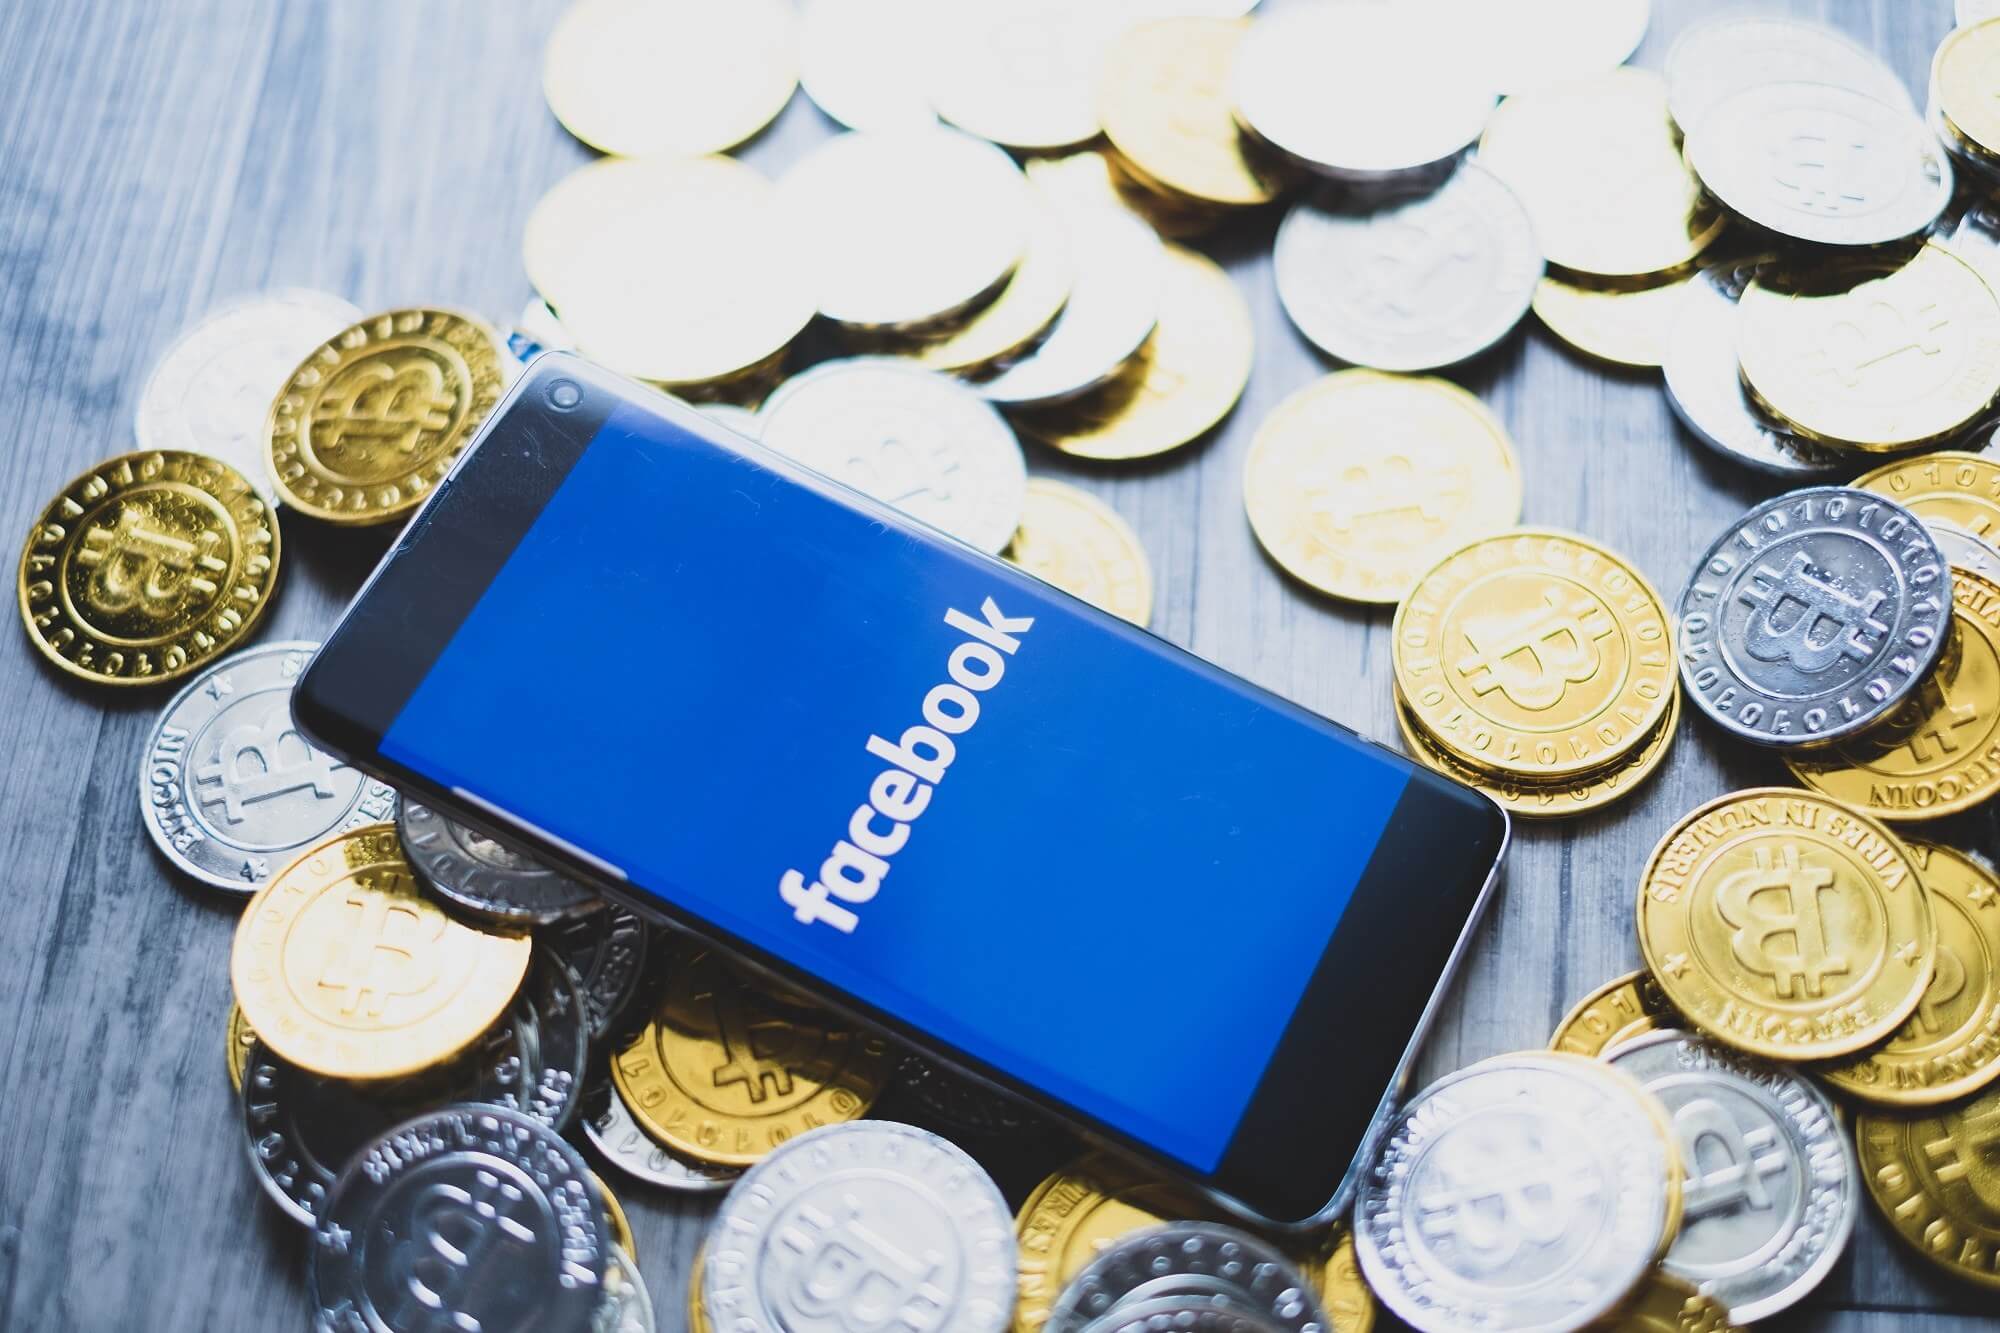 Facebook announces Libra cryptocurrency and Calibra digital wallet, will arrive next year